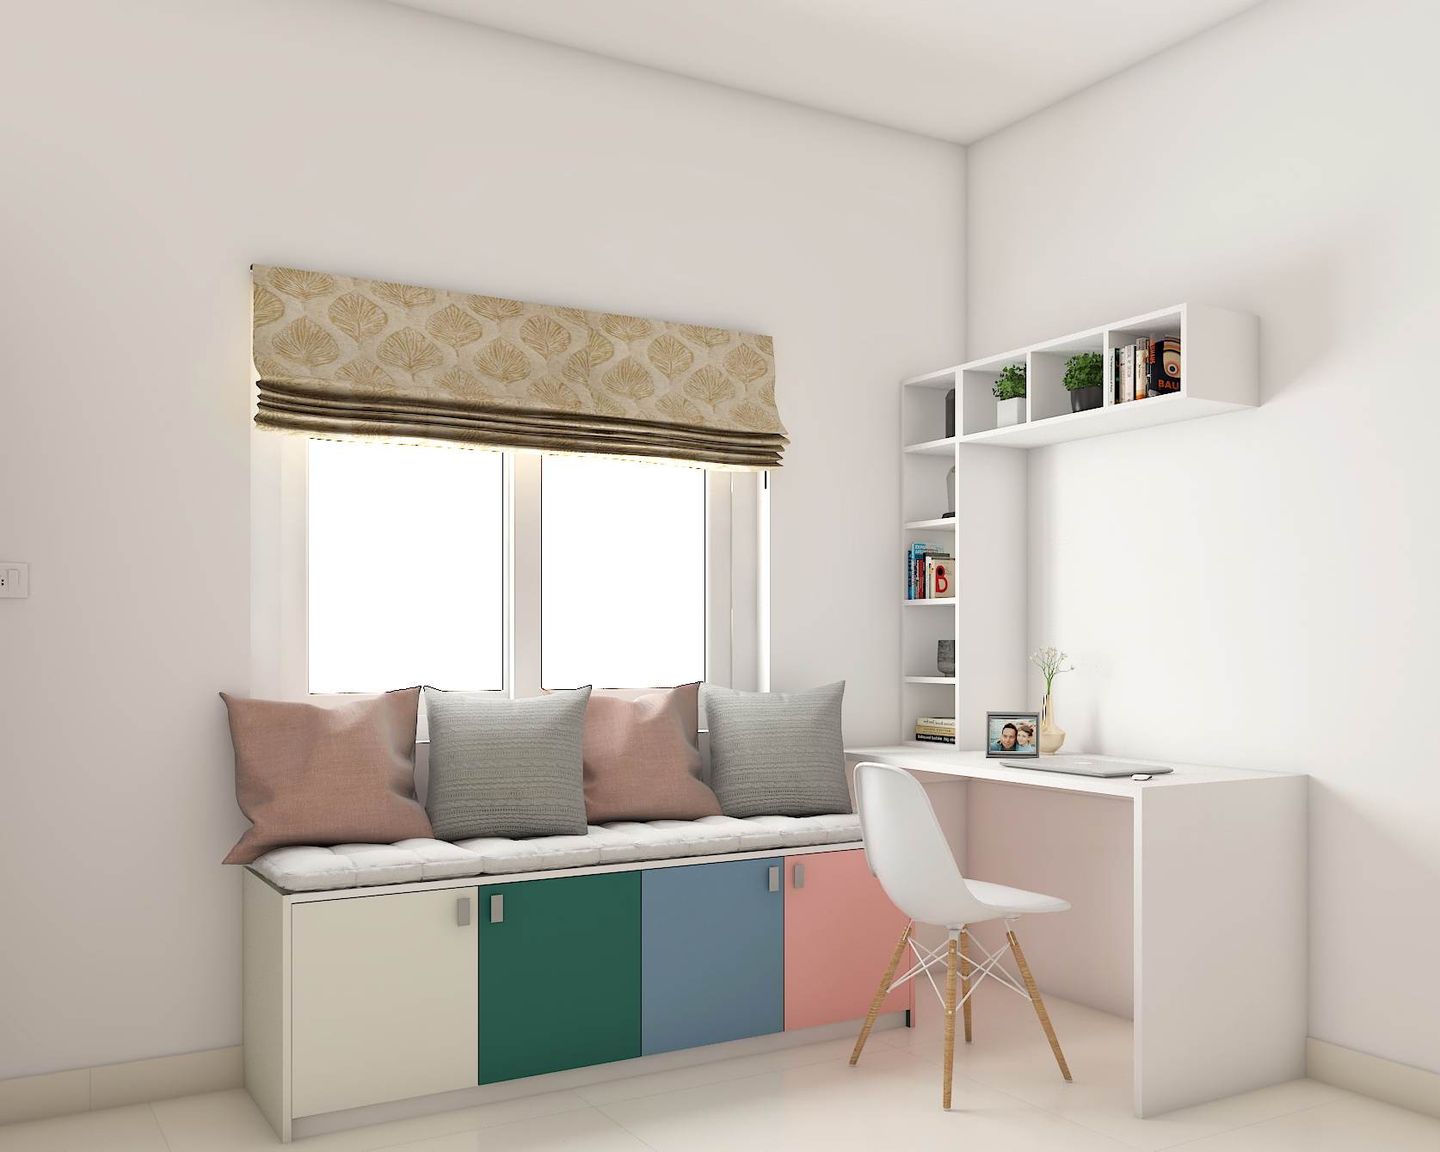 Study Room Design With Colourful Seater Storage -Livspace